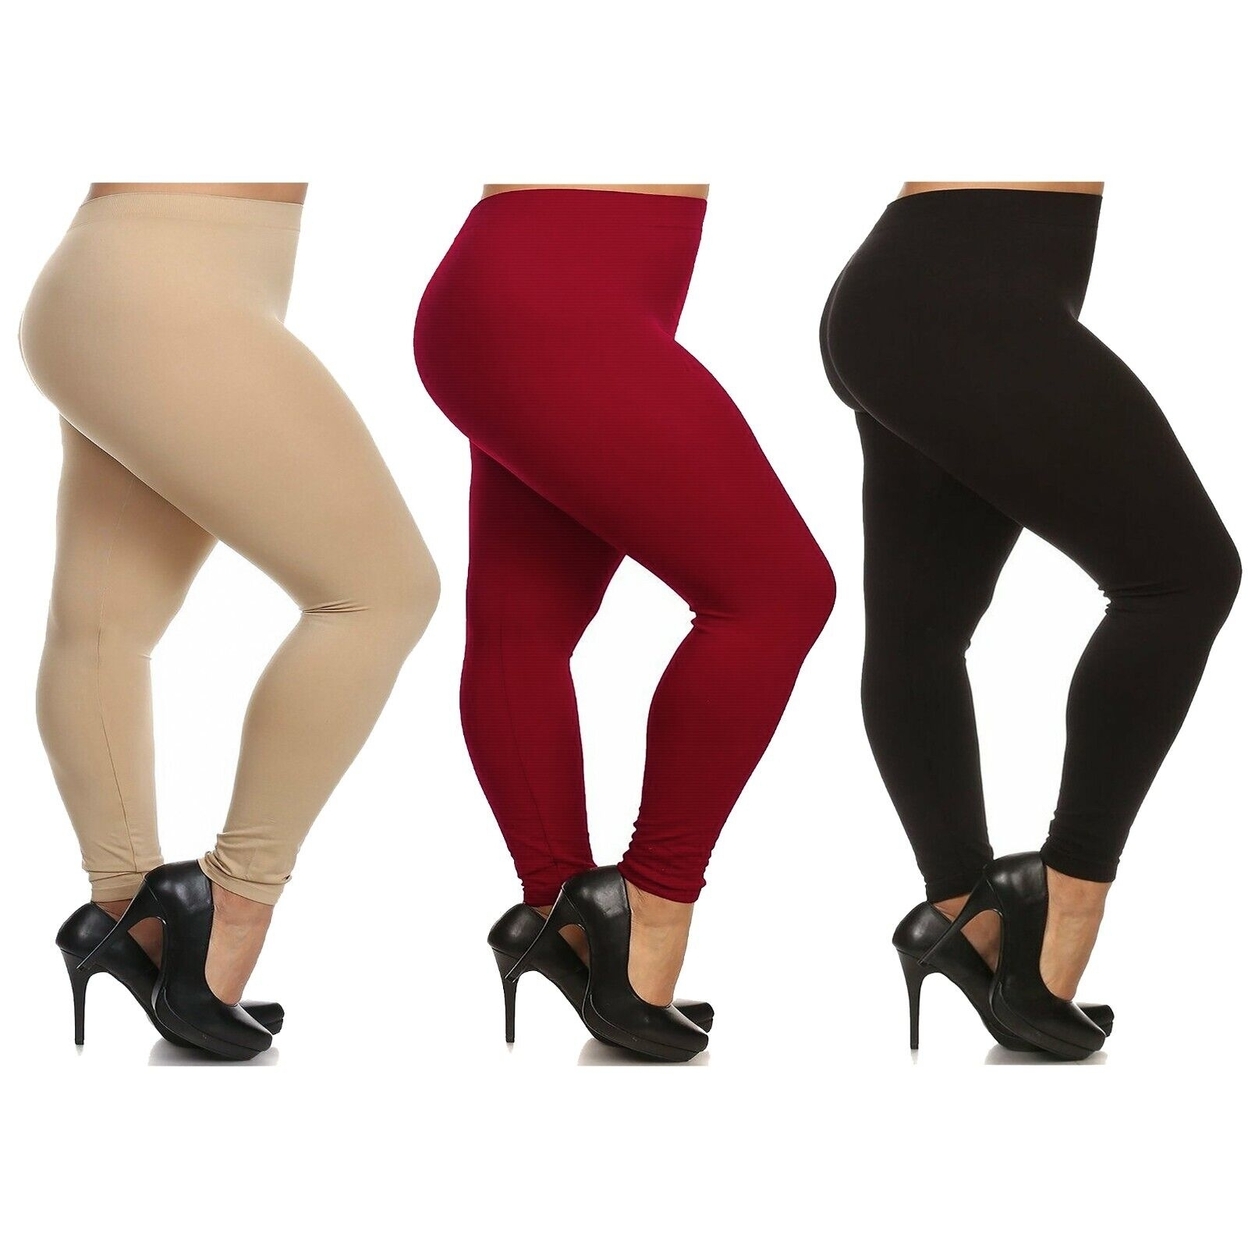 Women's Casual Ultra Soft Smooth High Waisted Athletic Active Yoga Leggings Plus Size Available - Red, 4x